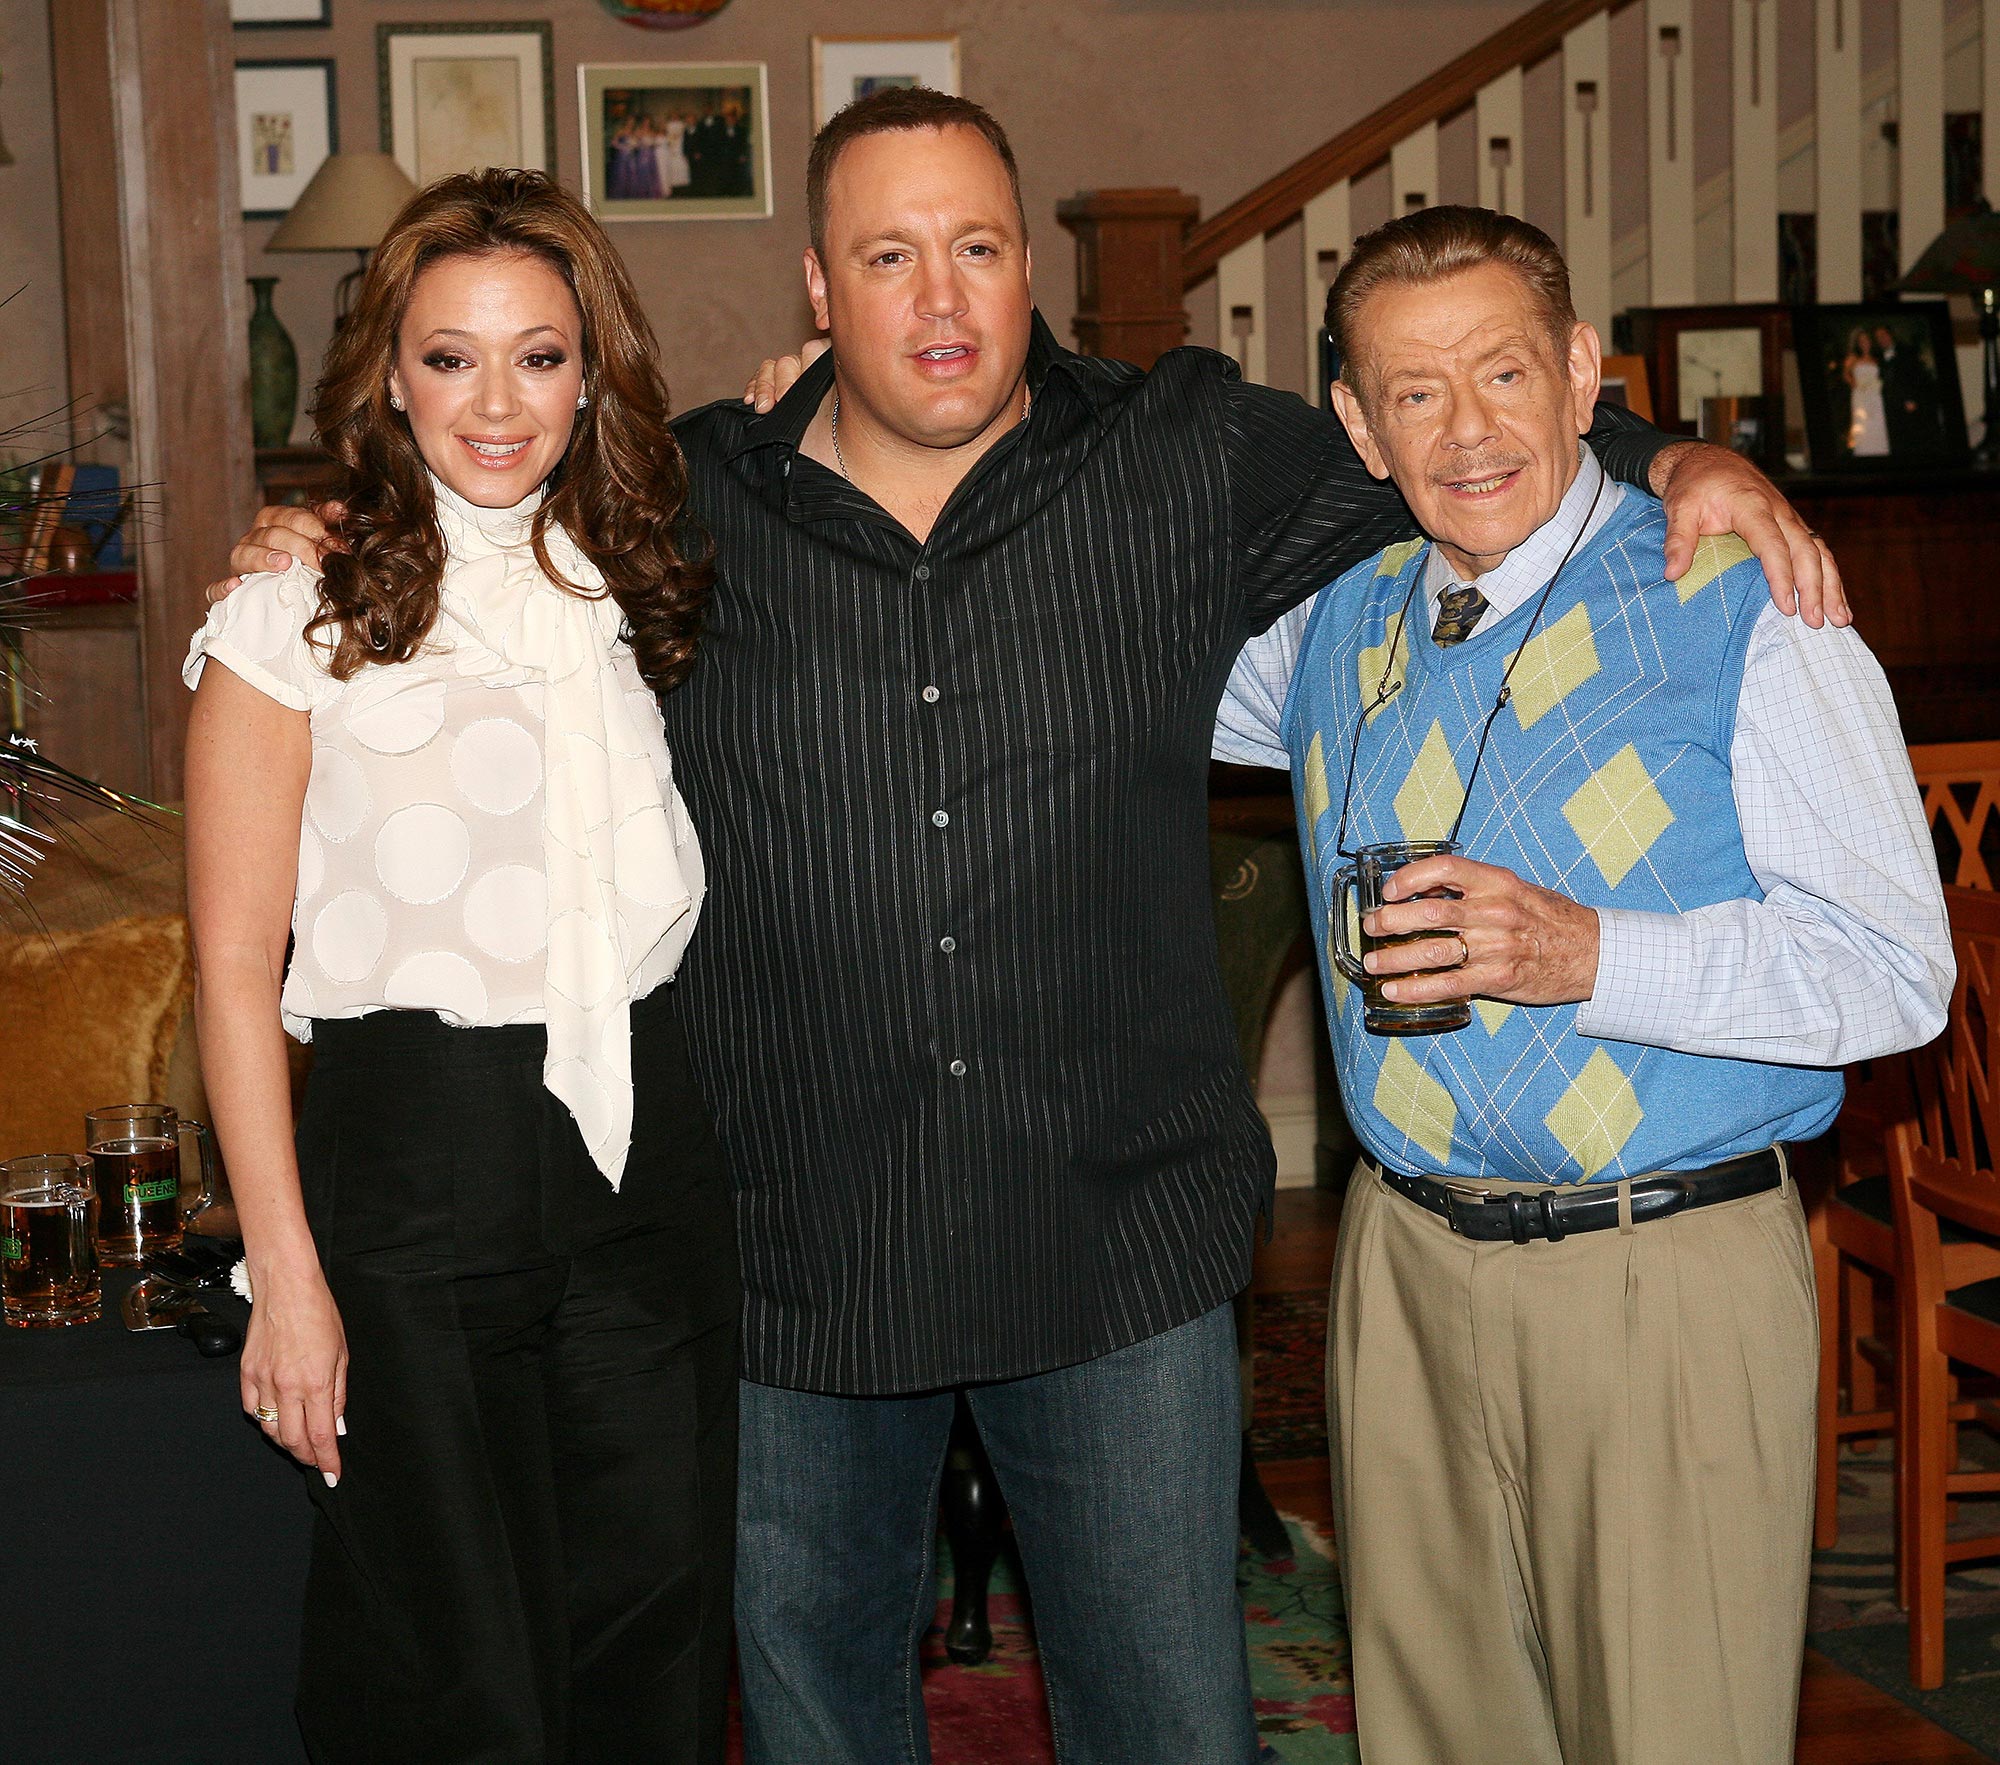 The King of Queens' Cast Honors Late Jerry Stiller During Reunion